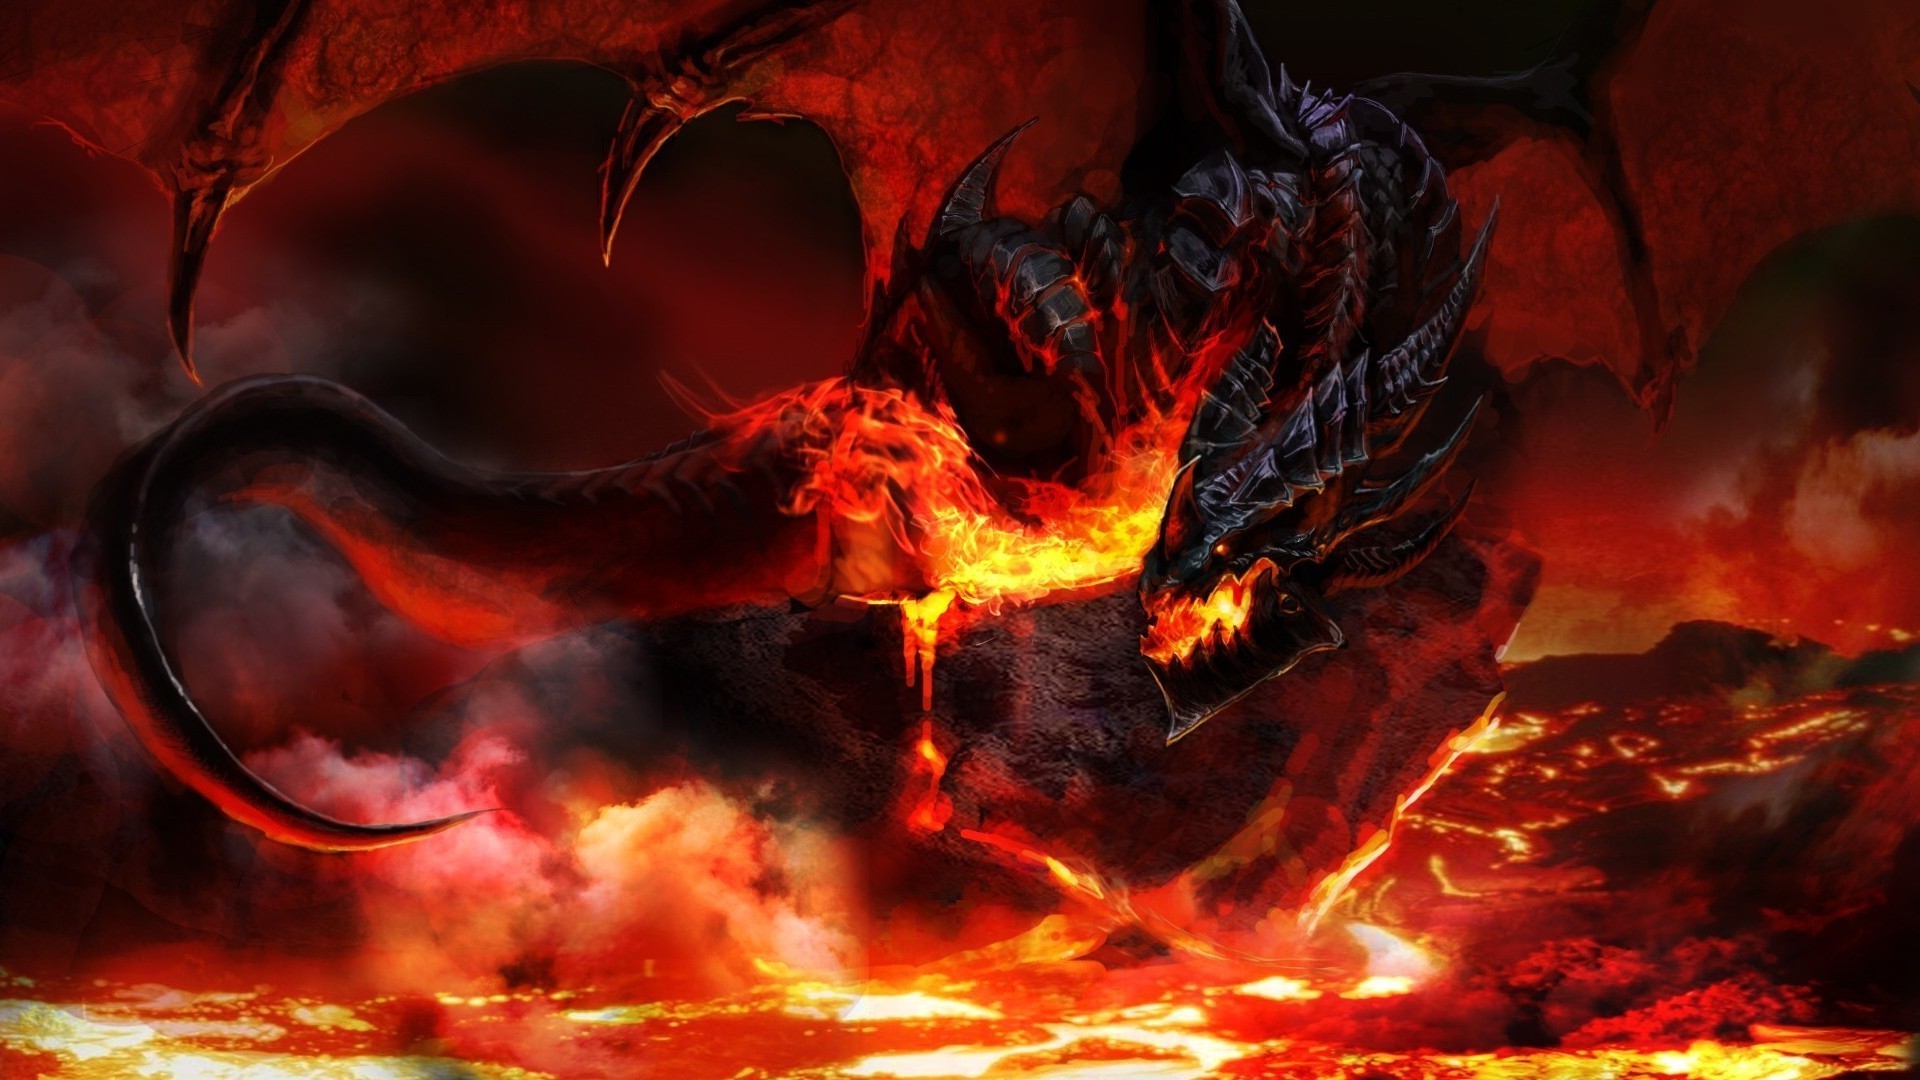 1920x1080 dragon 3d image, great image, images of dragon 3d, great image of dragon